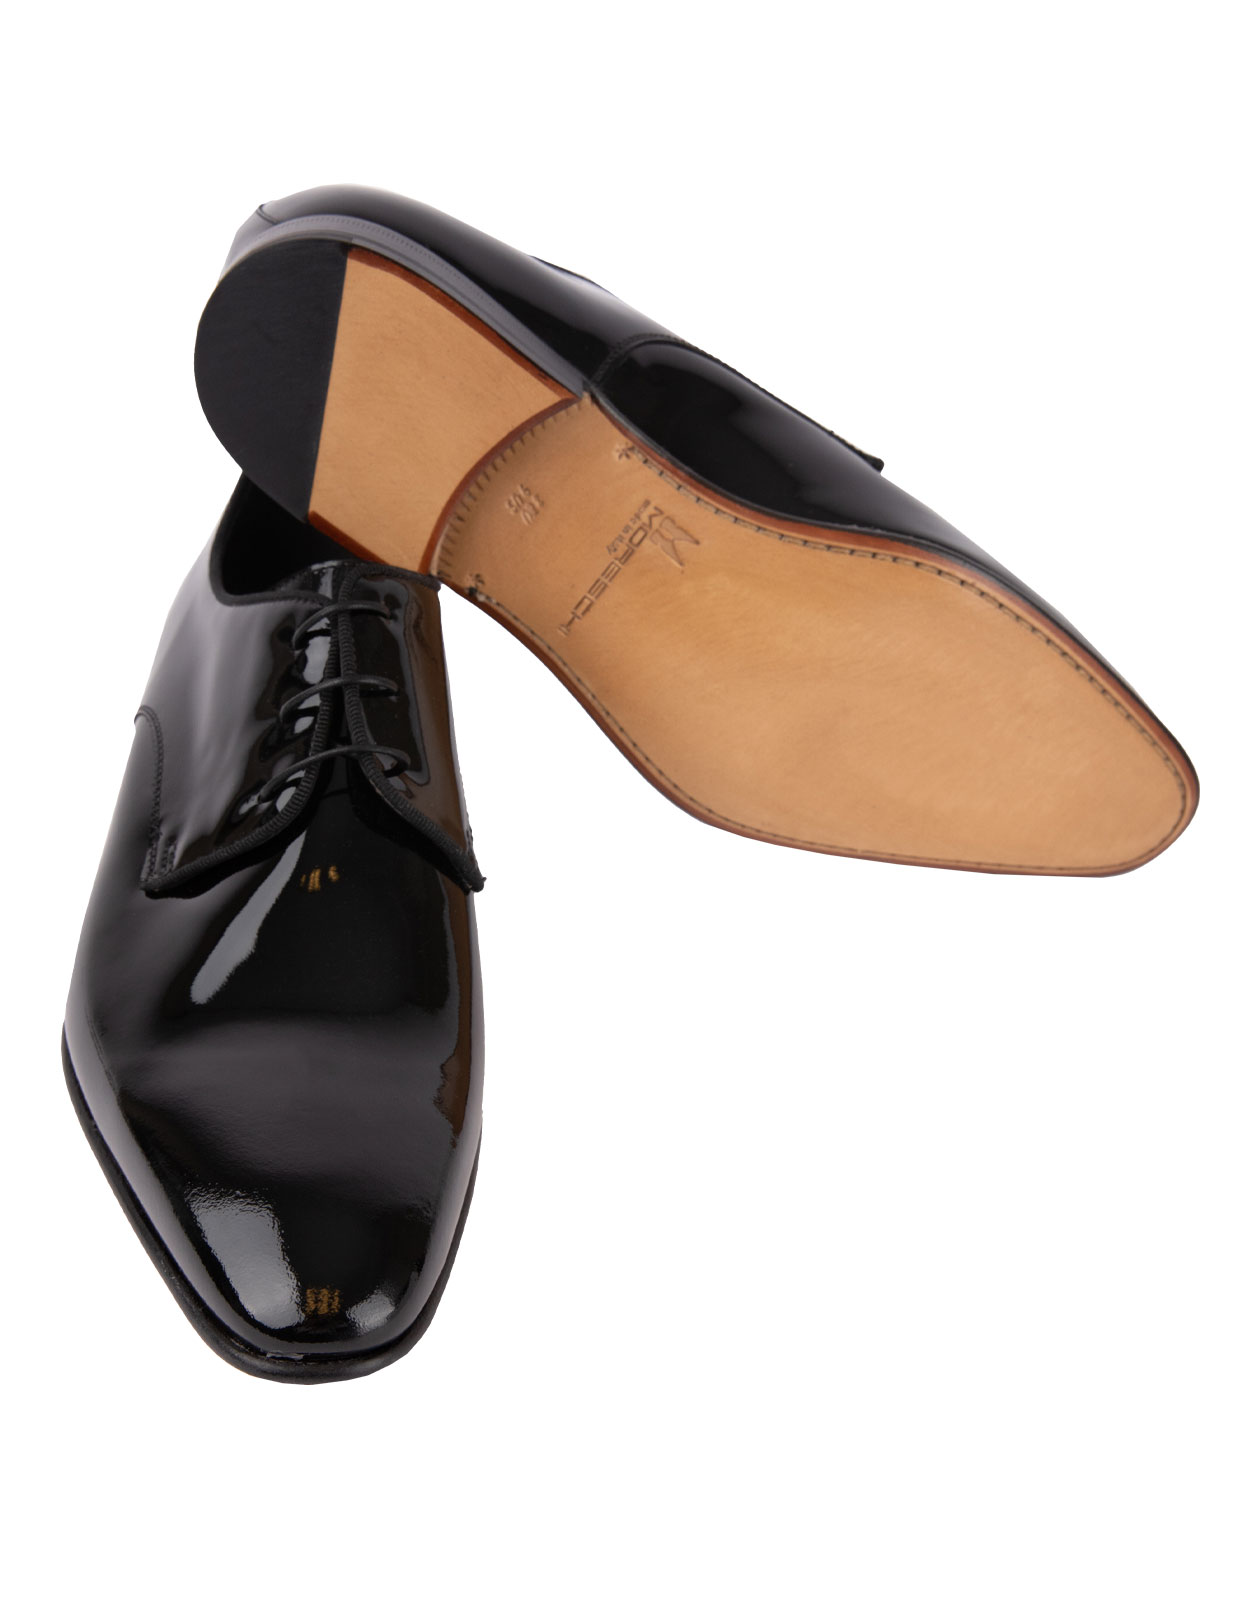 Lille Patent Leather Derby Shoes Black Stl 12